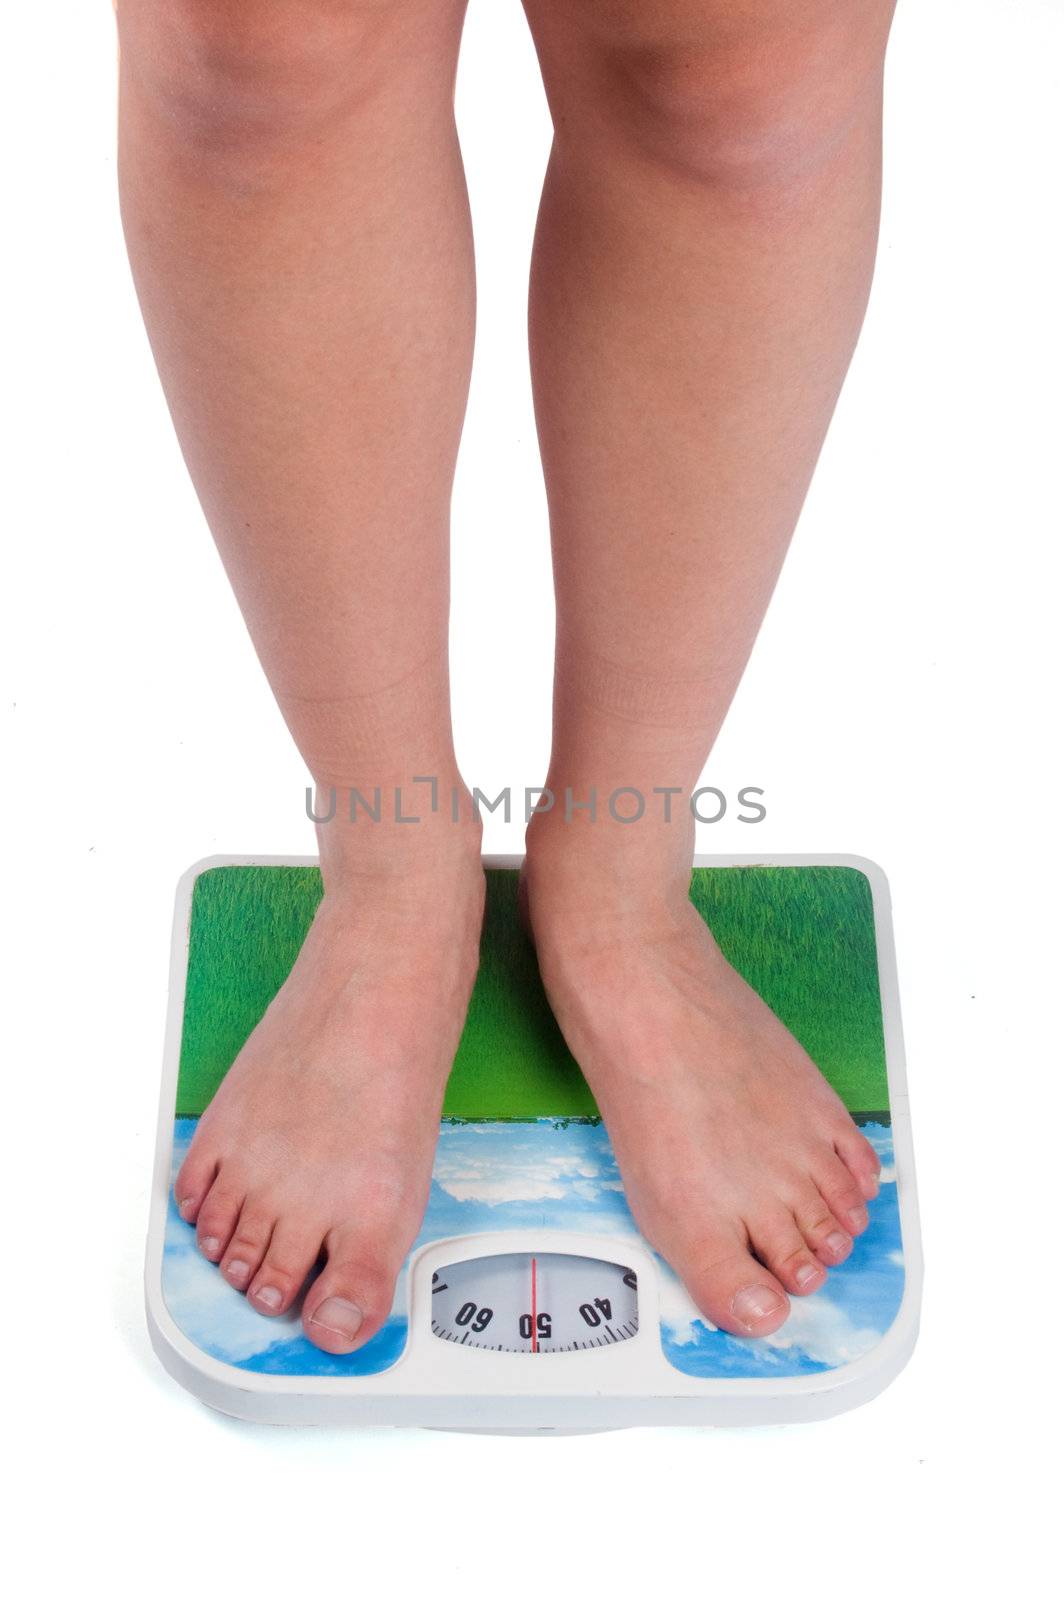 Leg of young caucasian female standing on bathroom scales, checking her weight

